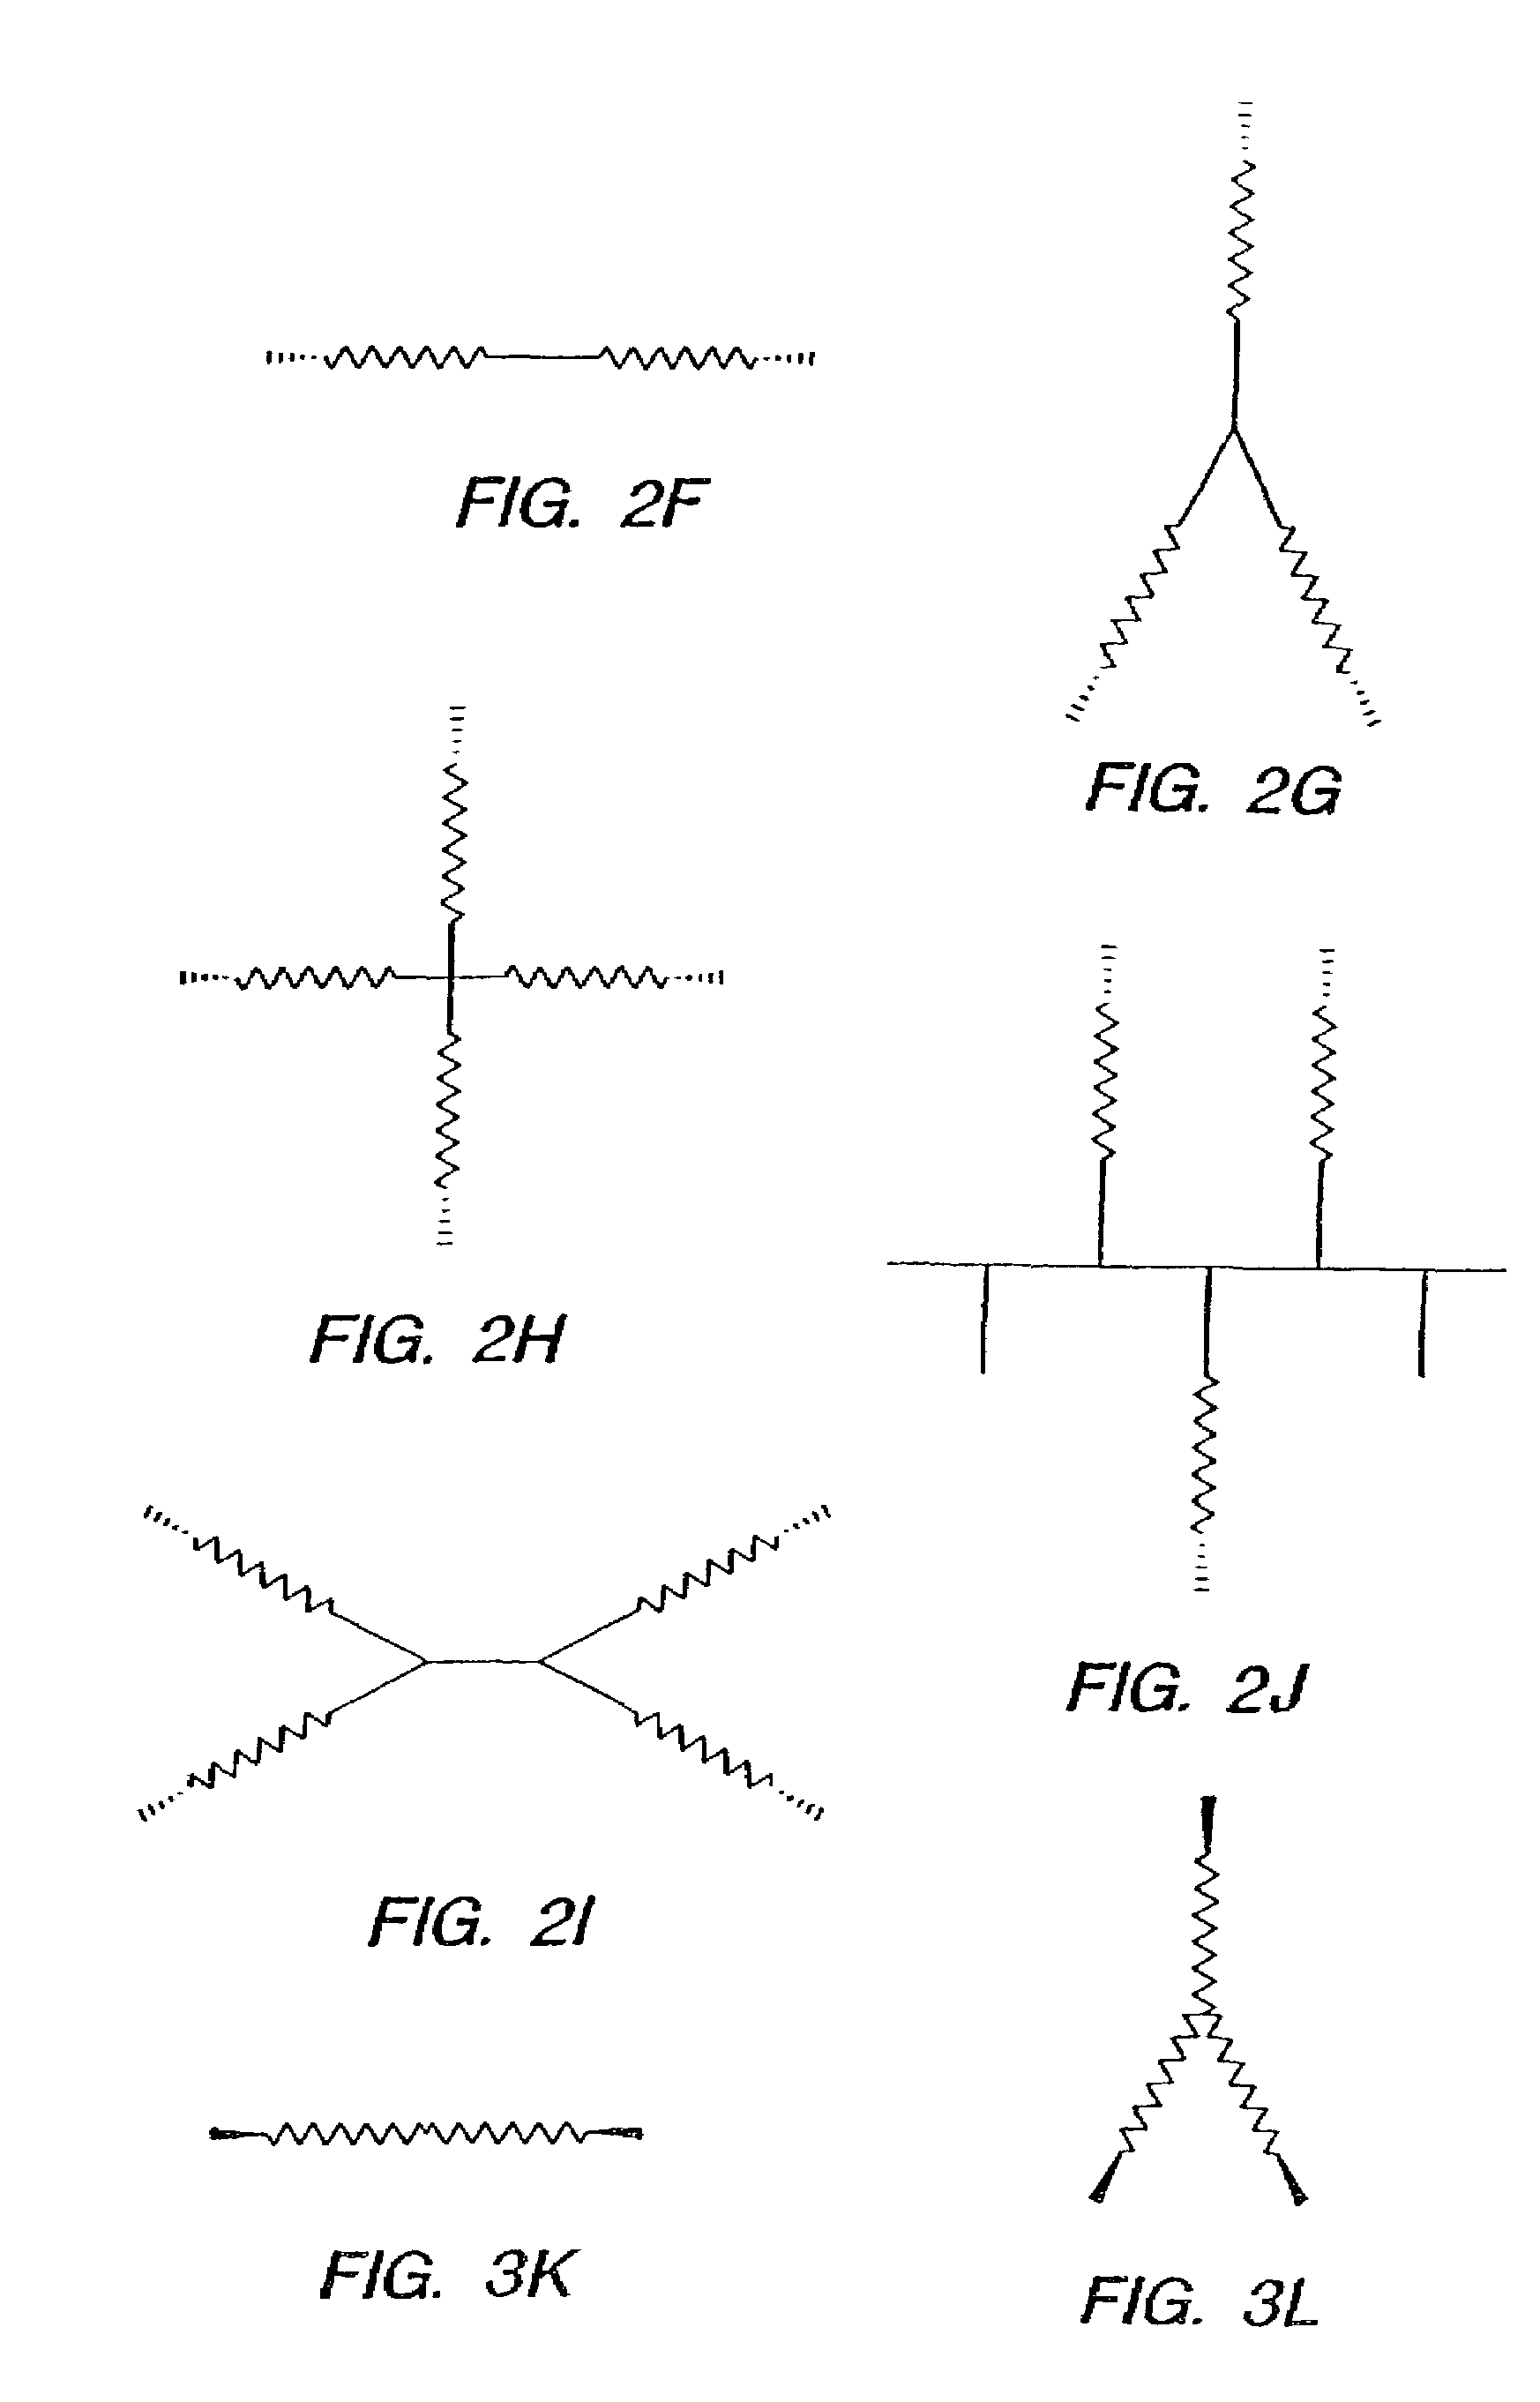 Adhesion barriers applicable by minimally invasive surgery and methods of use thereof